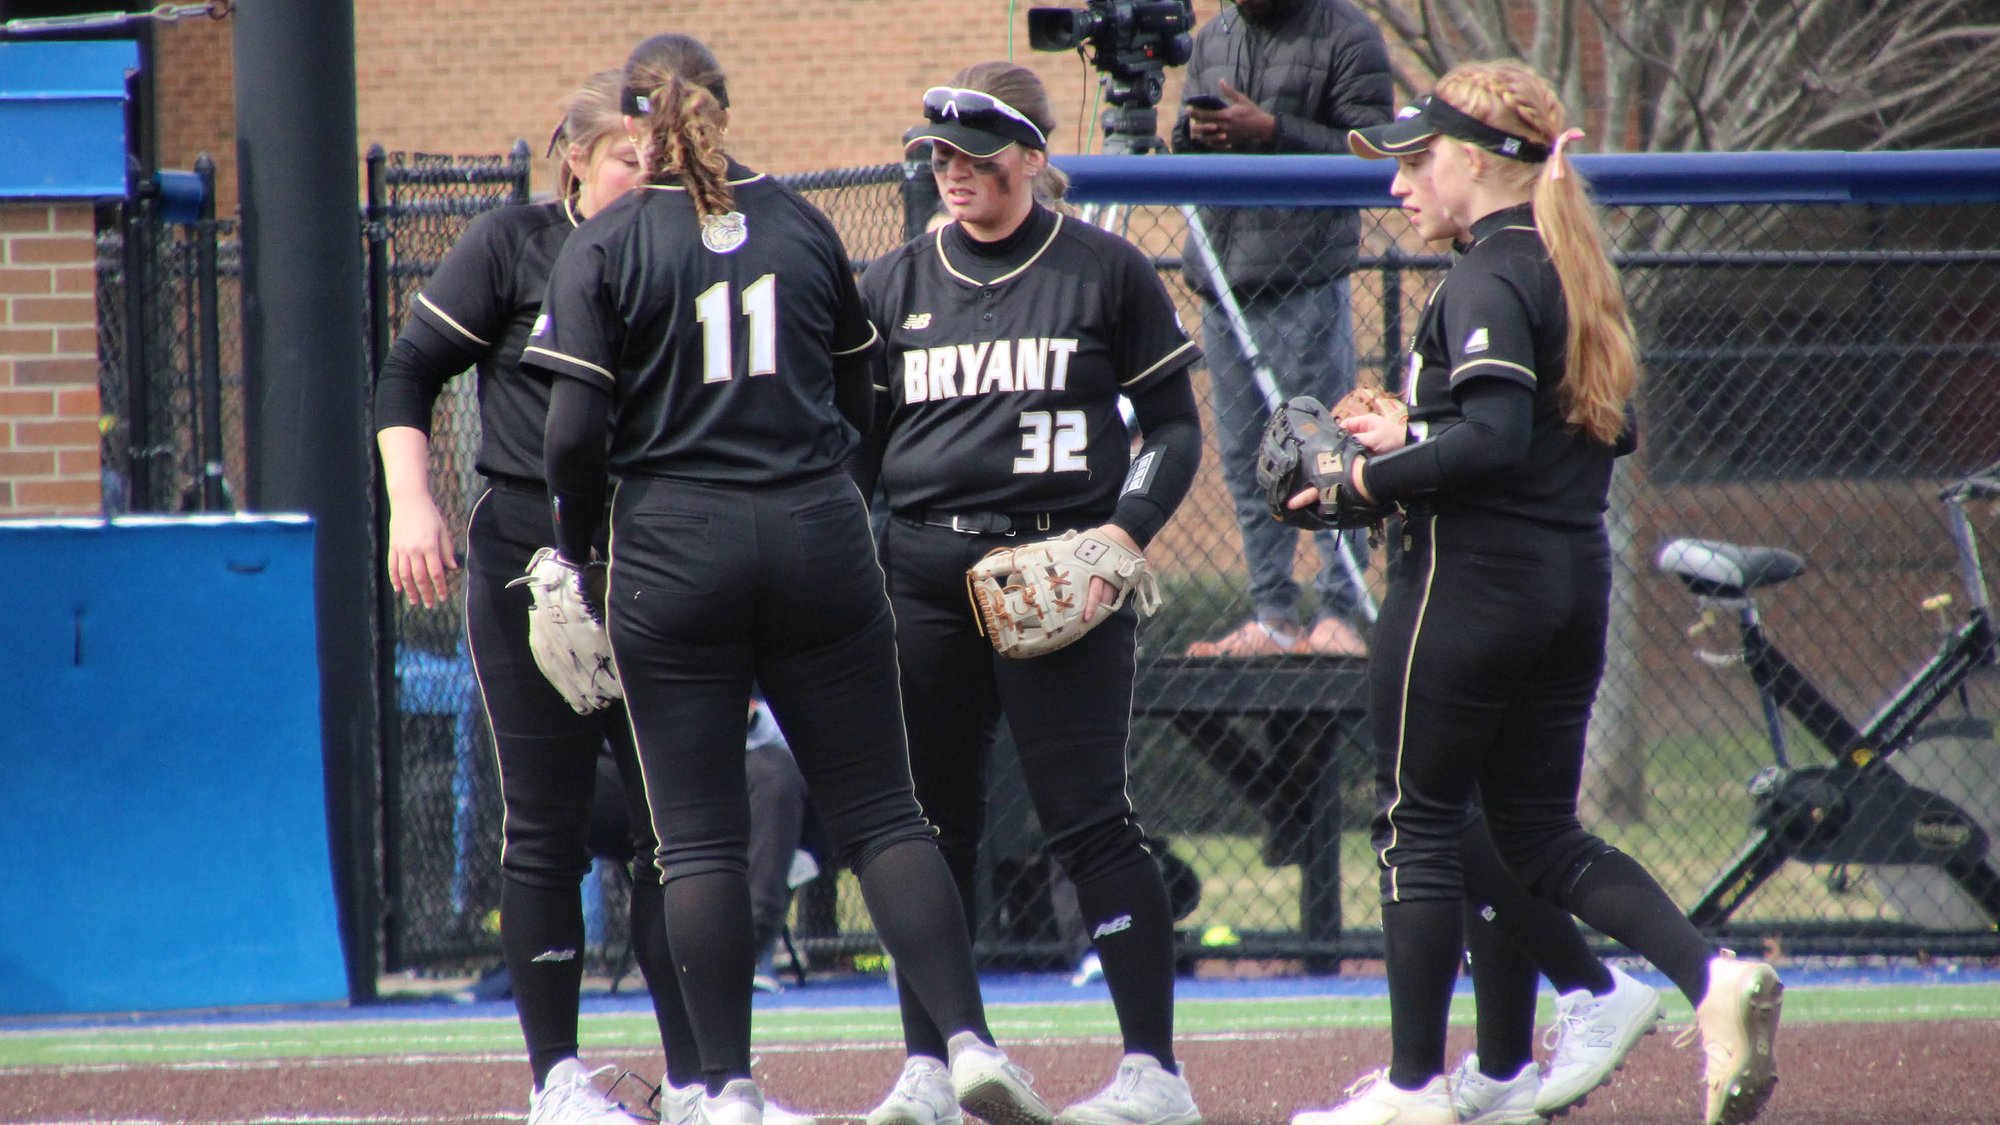 Bryant welcomes Brown for Wednesday DH at Conaty Park